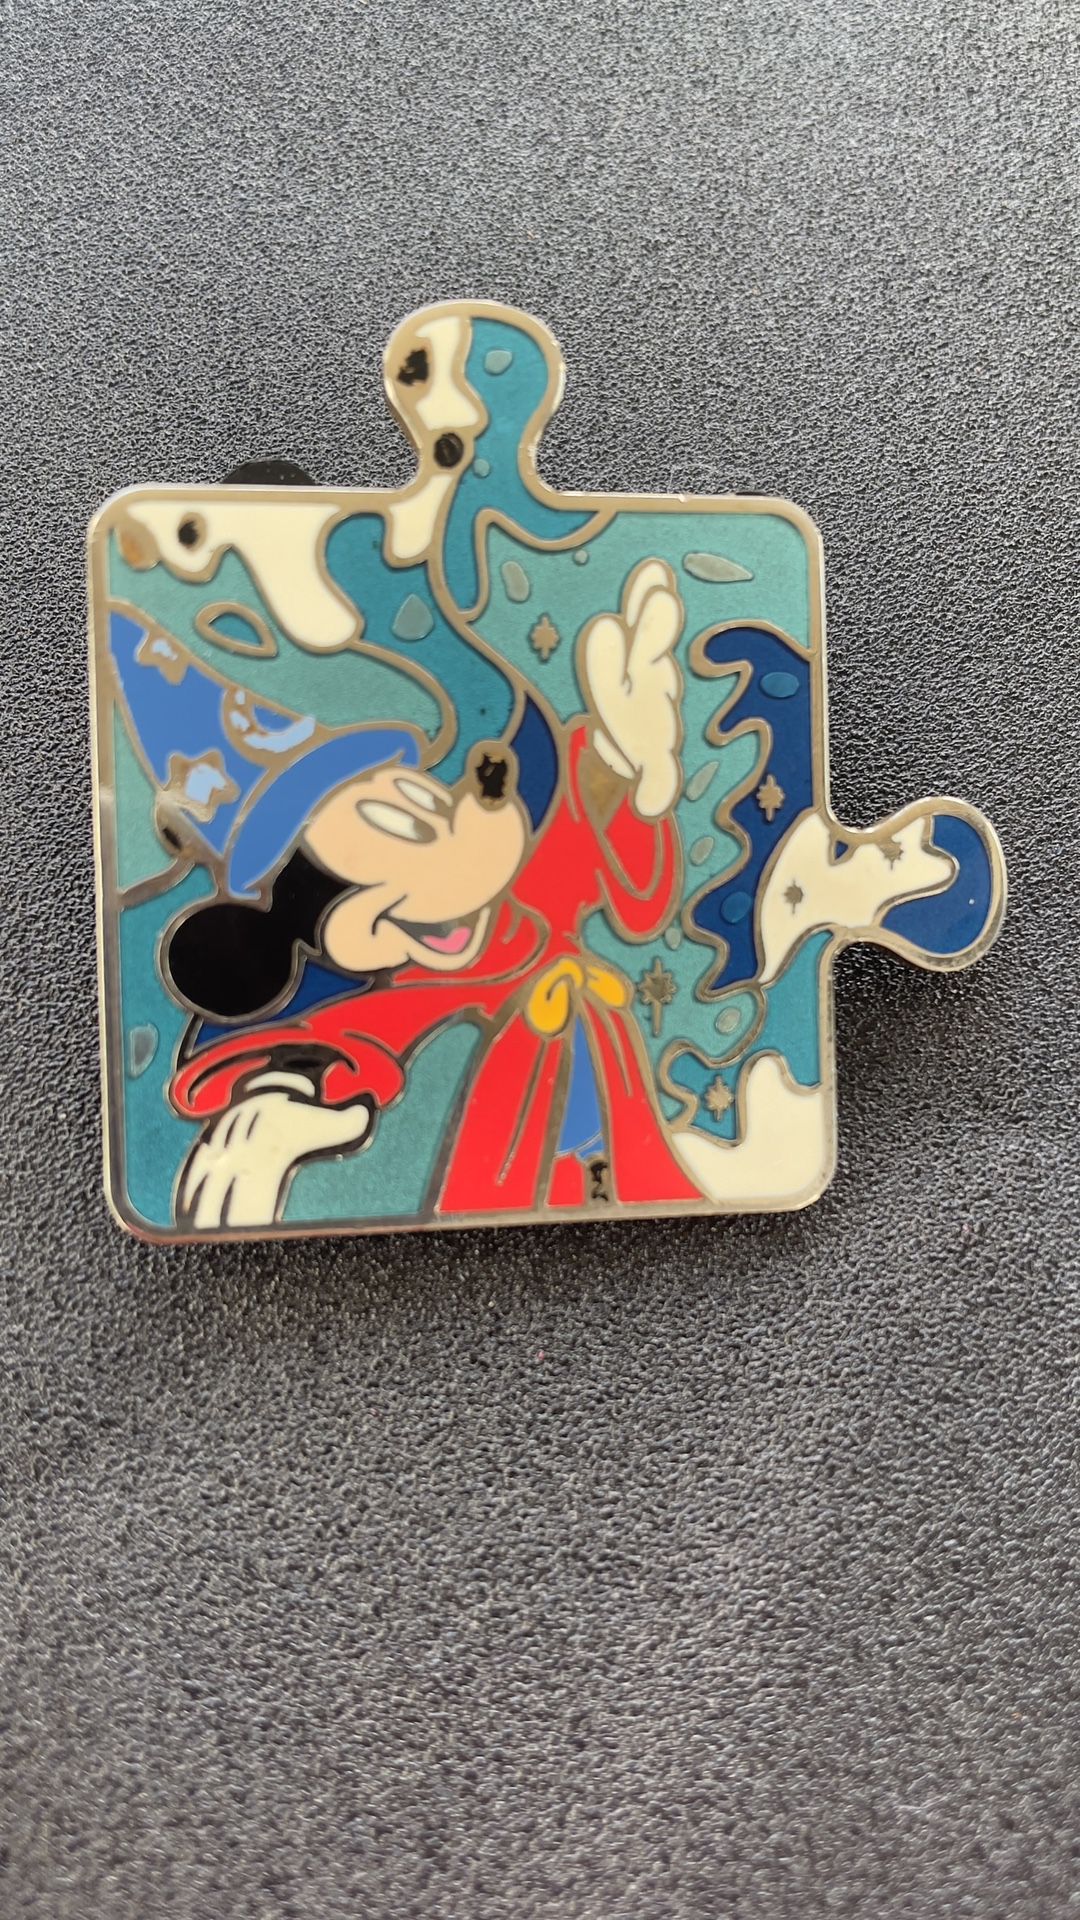 Sorcerer Mickelson Pin Limited Edition Of 400 